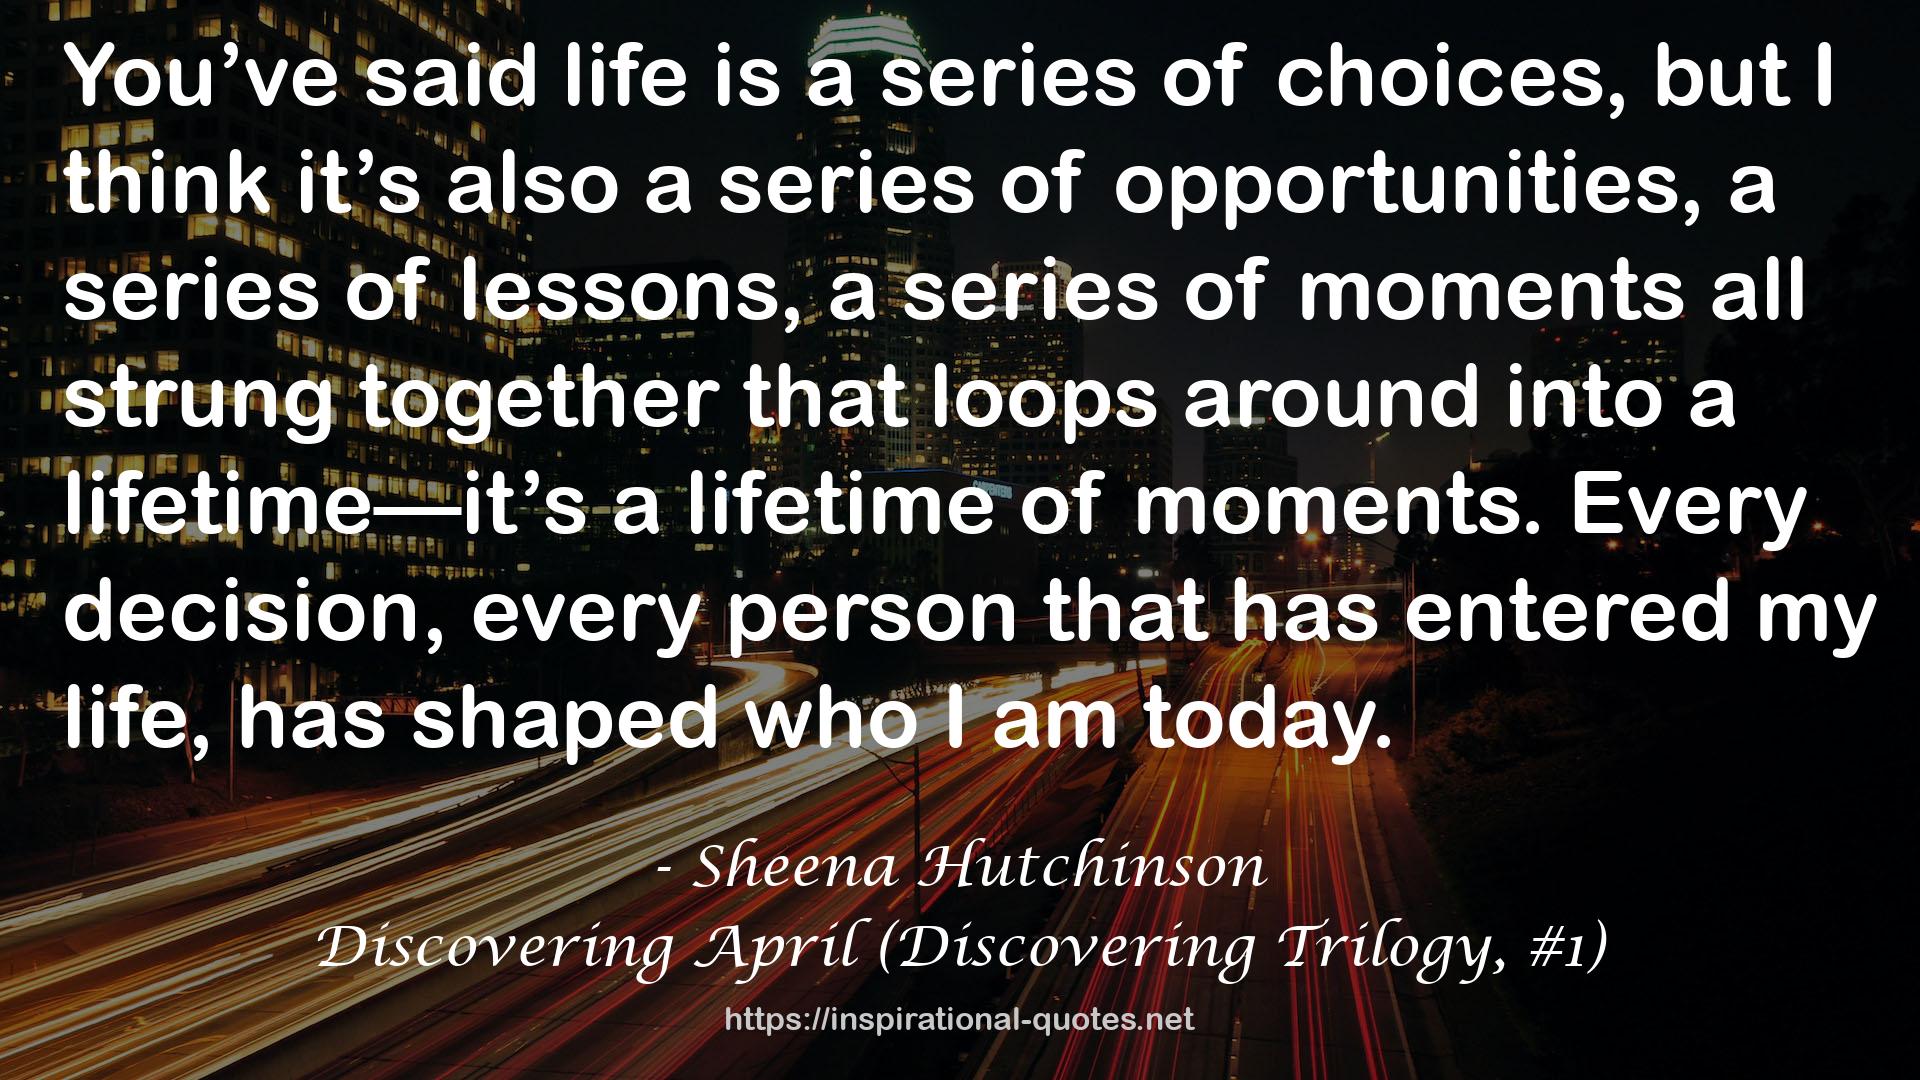 Discovering April (Discovering Trilogy, #1) QUOTES